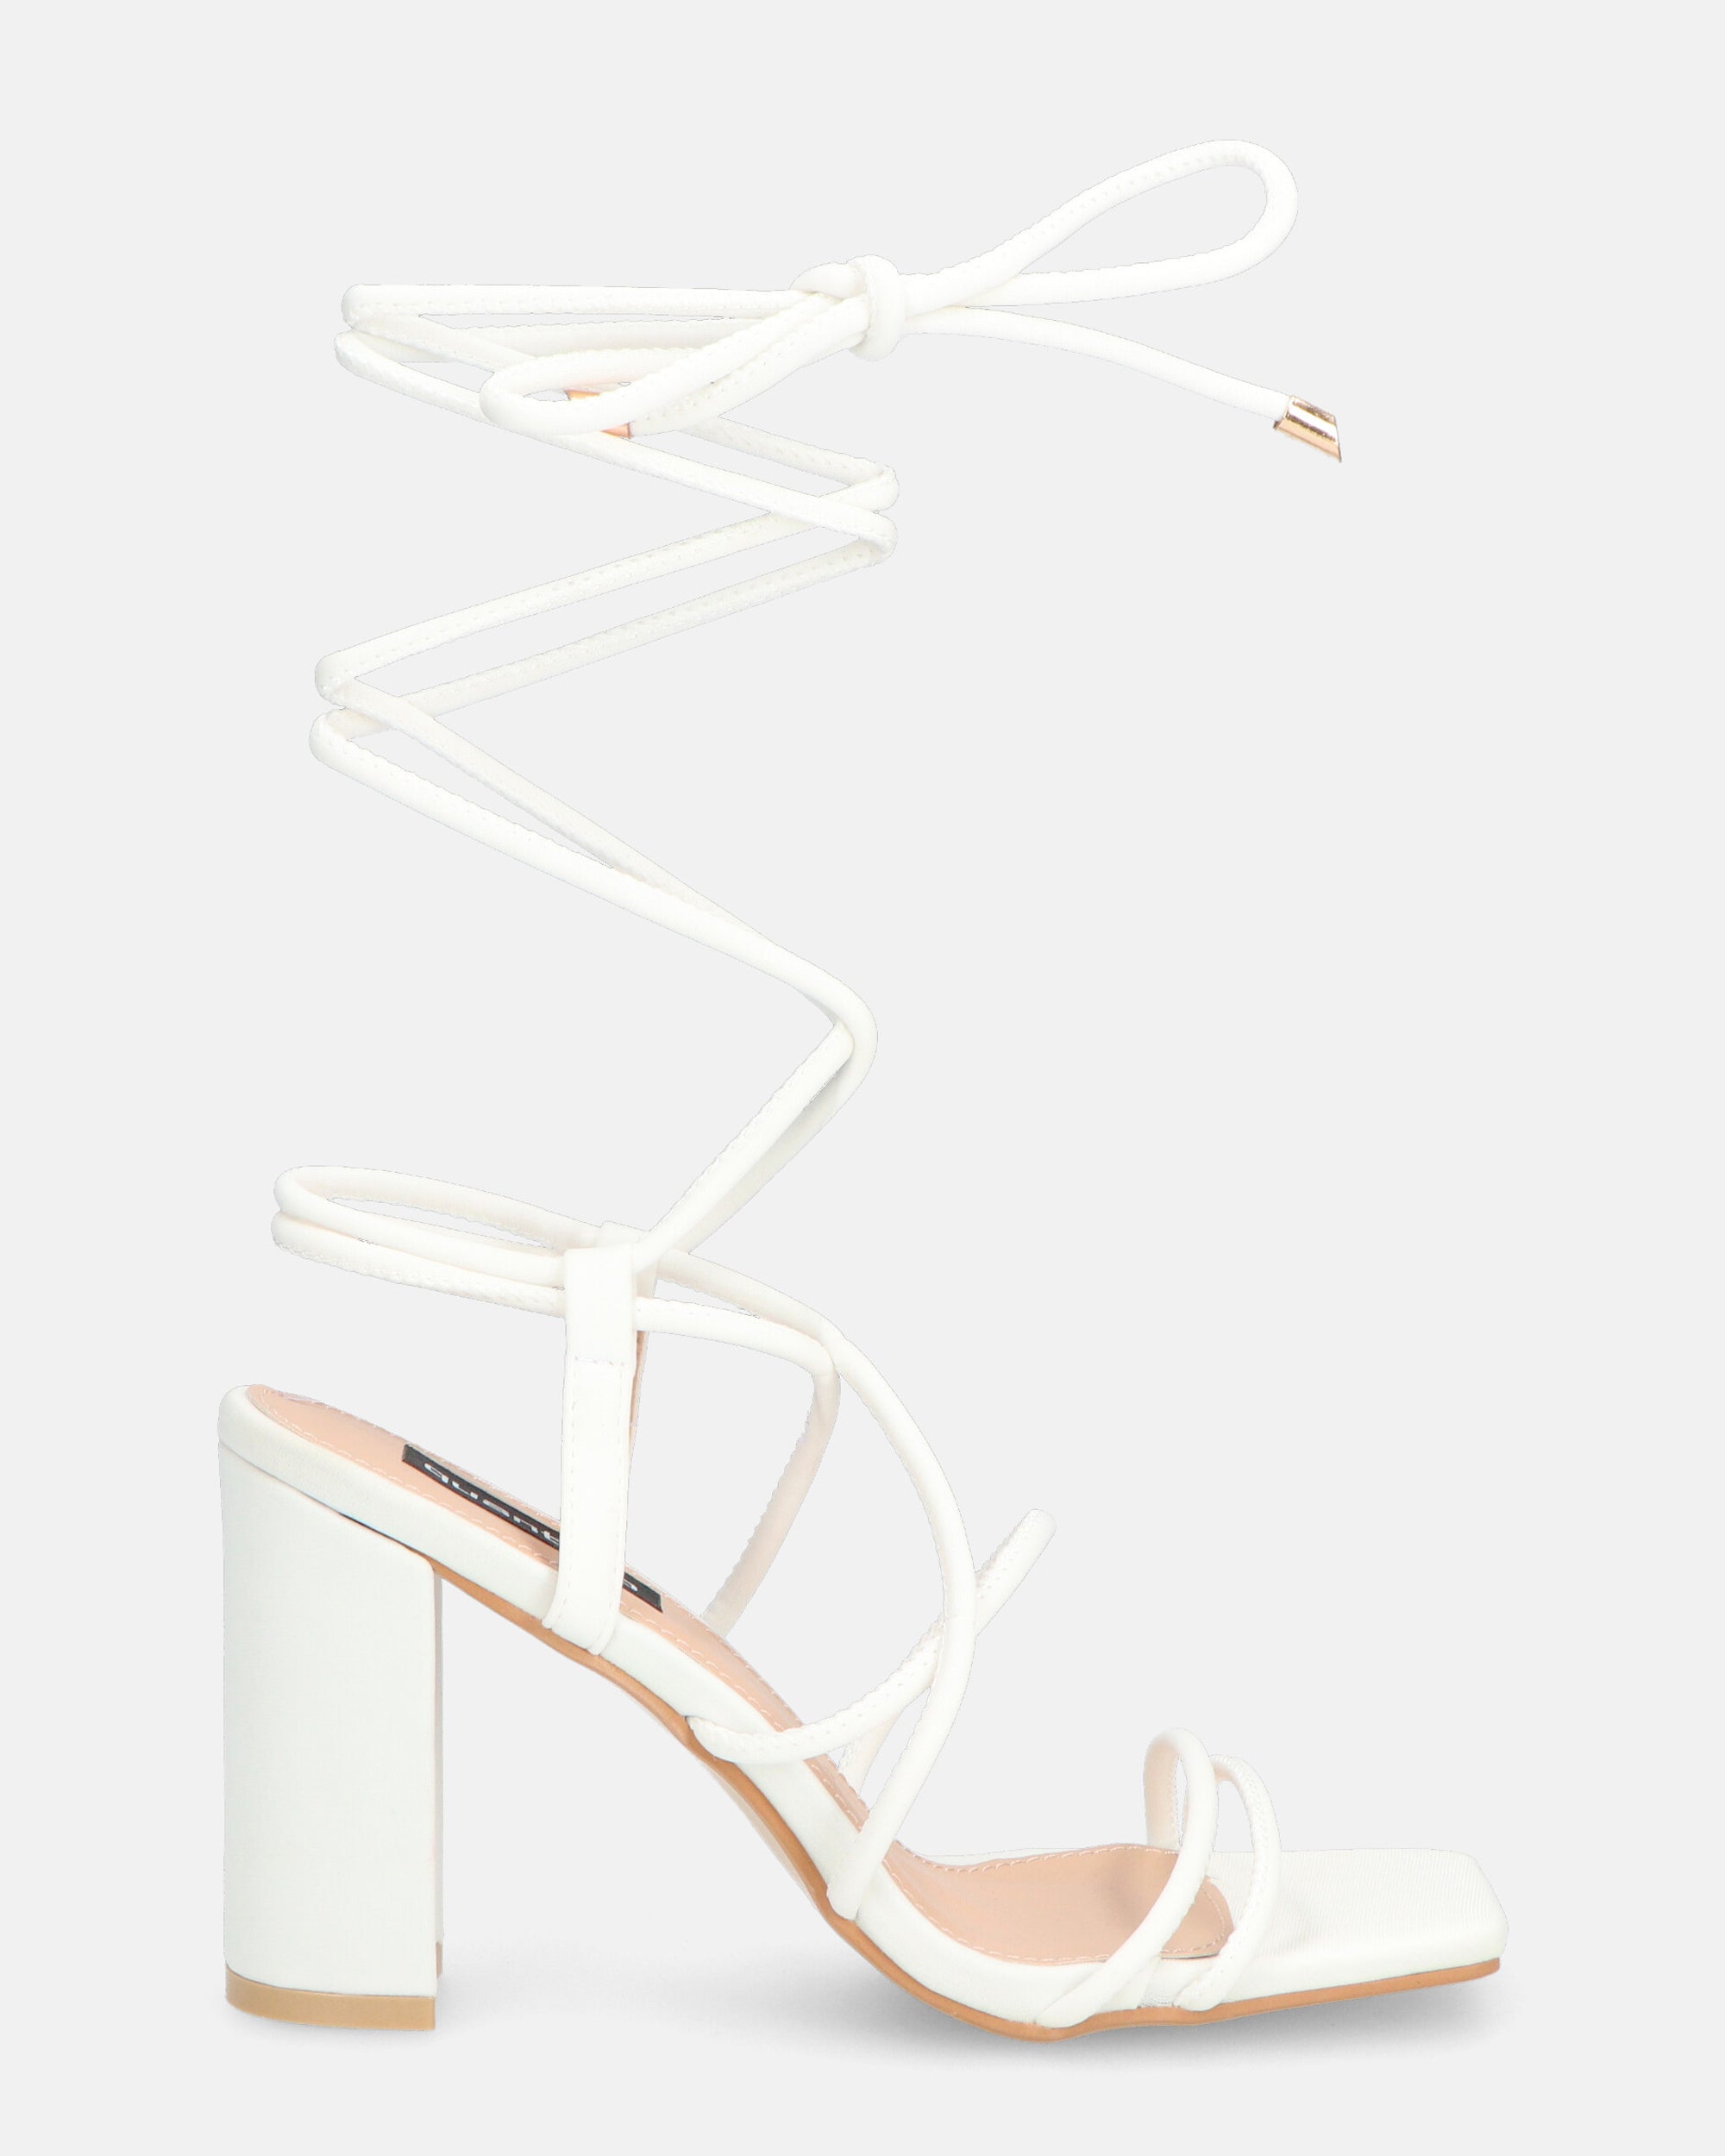 MARISOL - white lycra sandals with laces and heel